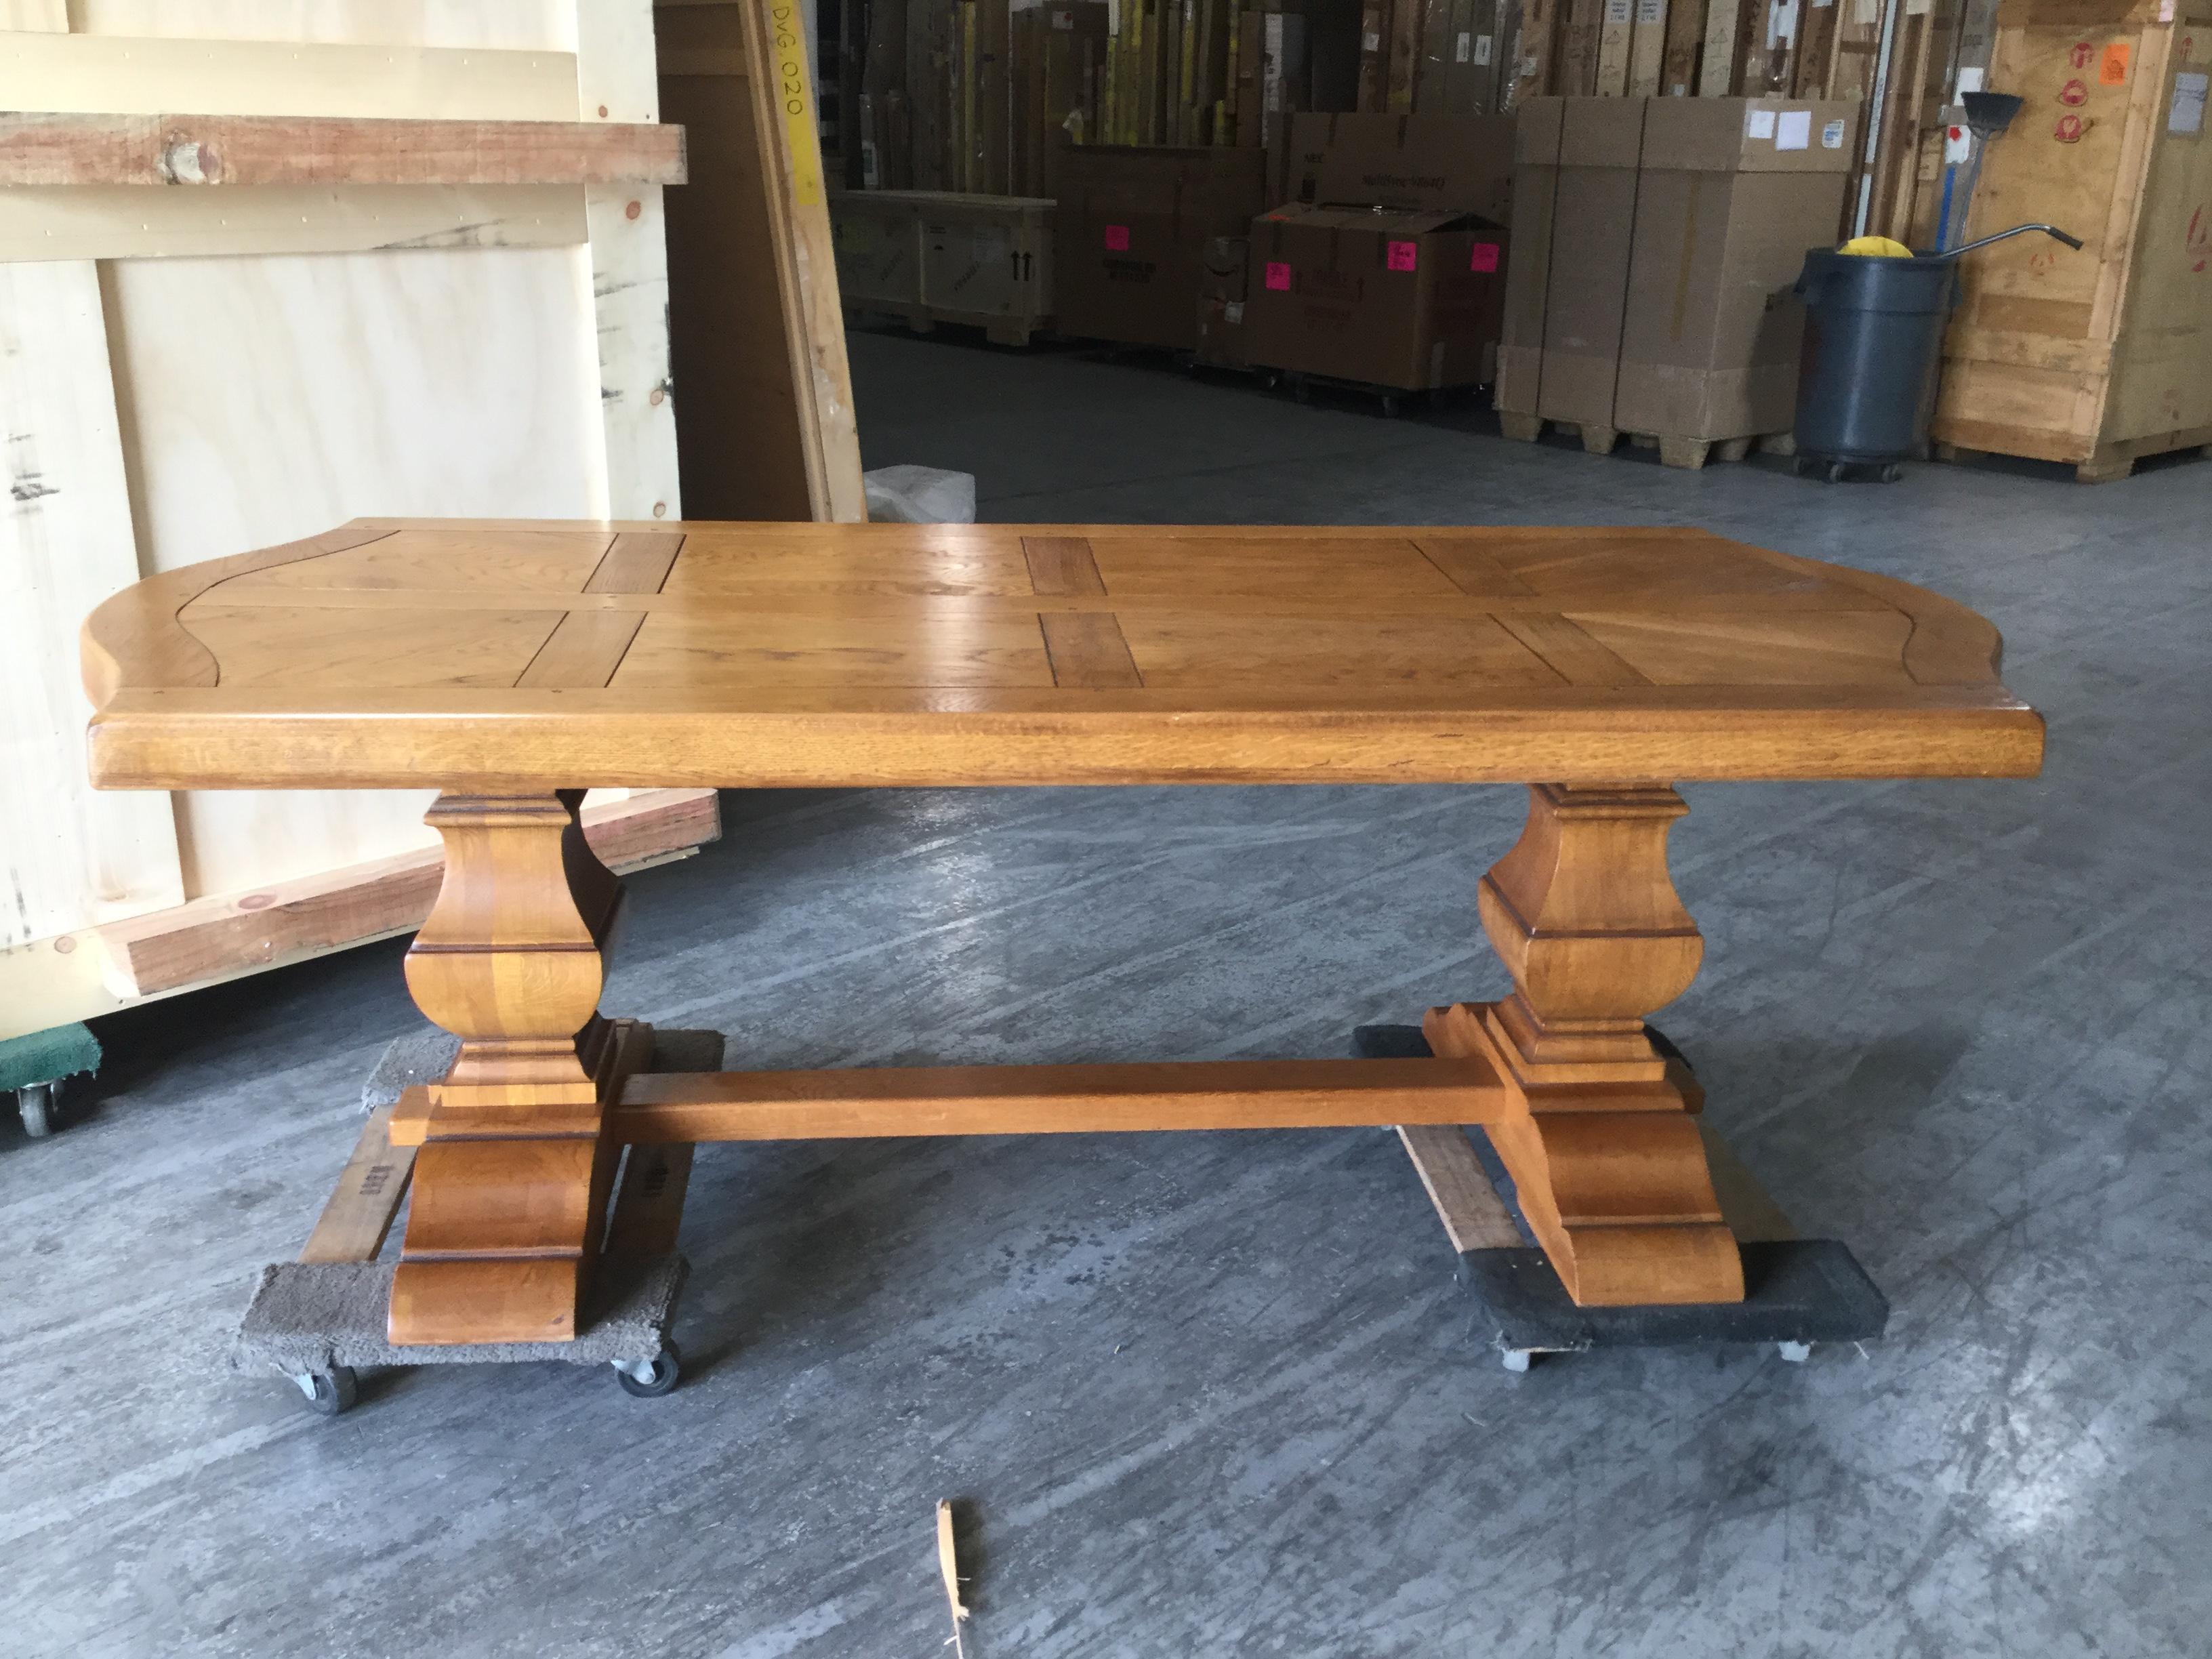 Handsome French oak dining table with a parquet top that is 3